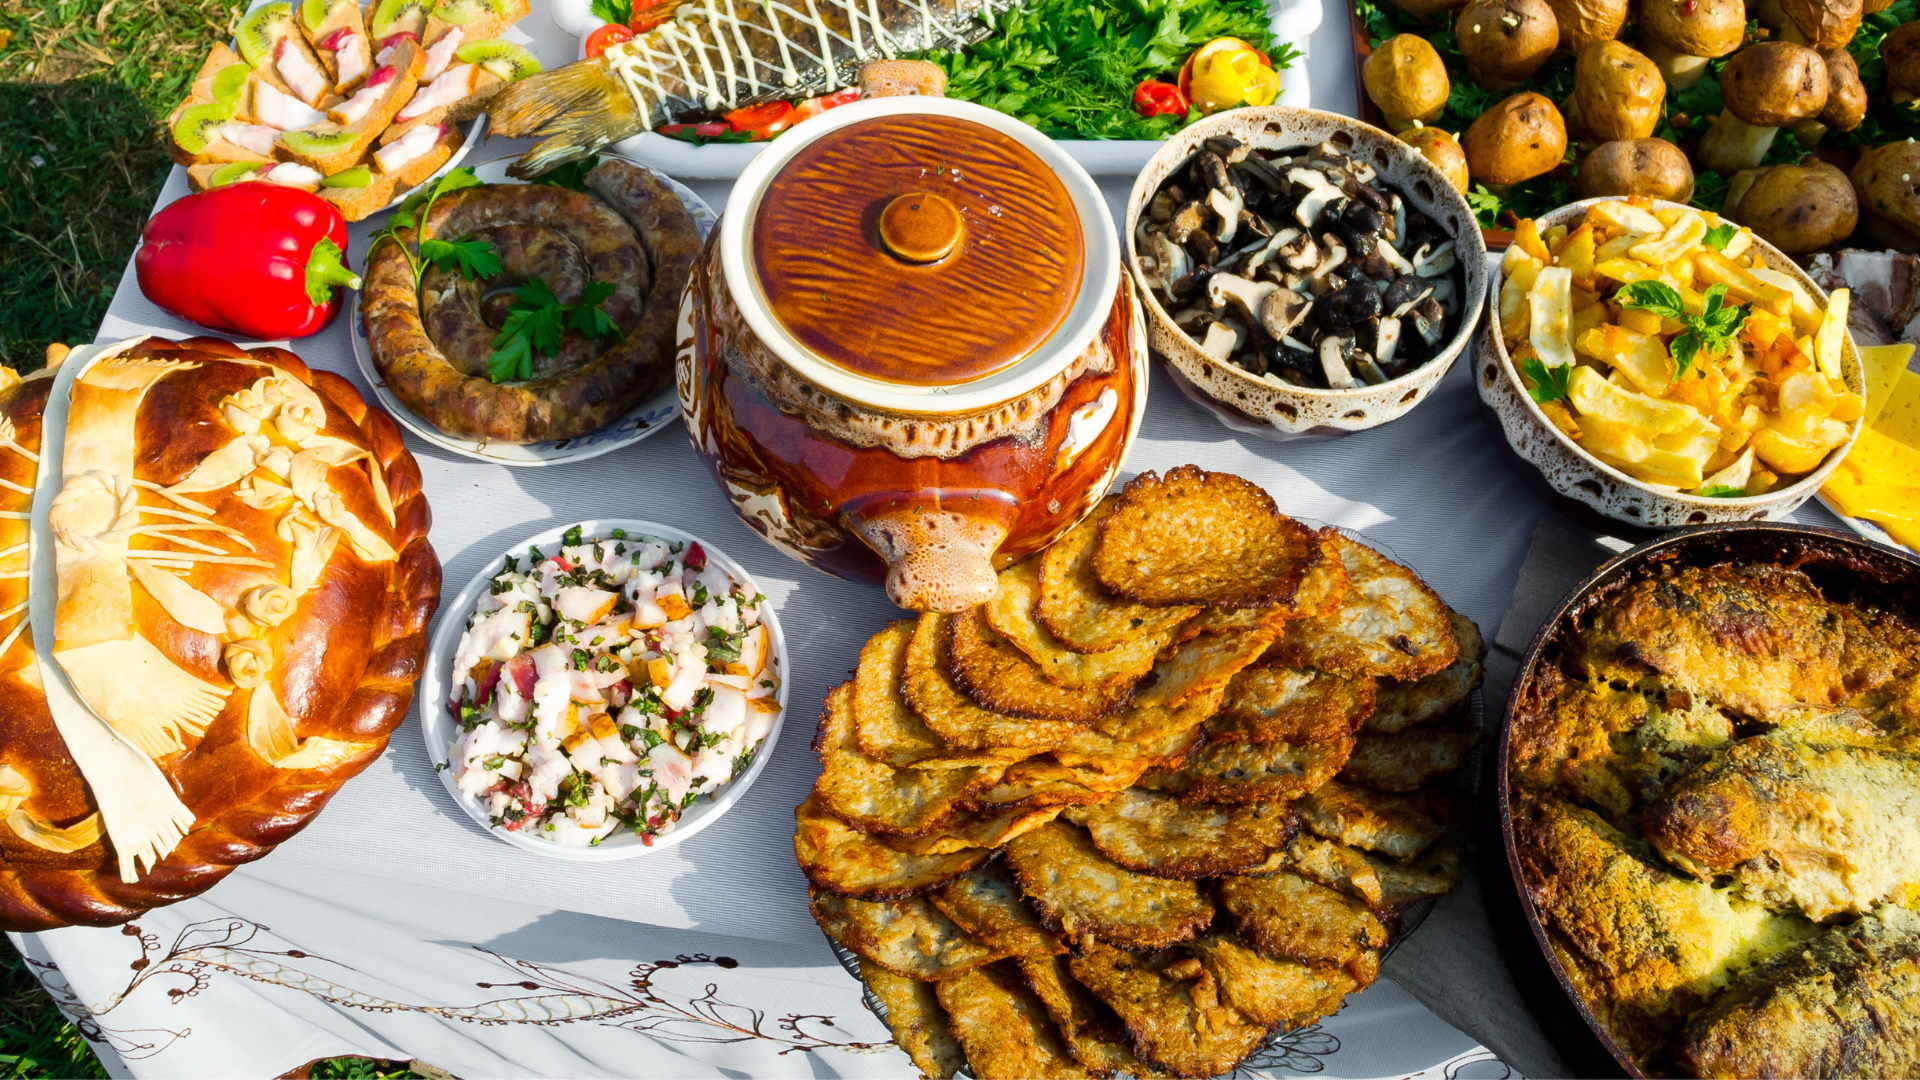 ukrainian recipes are rich in nutrients and have vegeterian and vegan options.